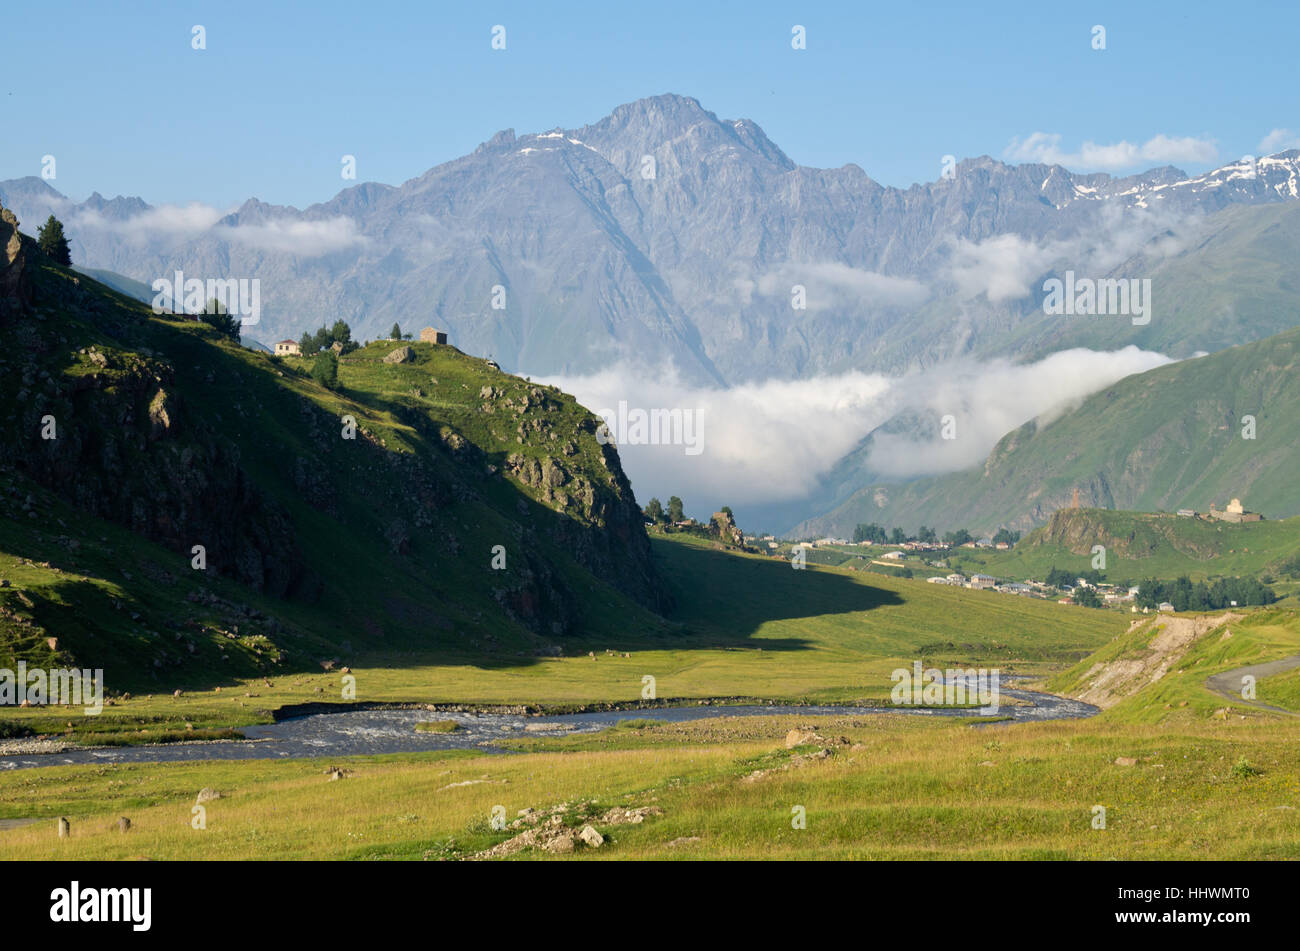 georgia, caucasus, blue, hill, mountains, green, asia, width, rock, valley, Stock Photo